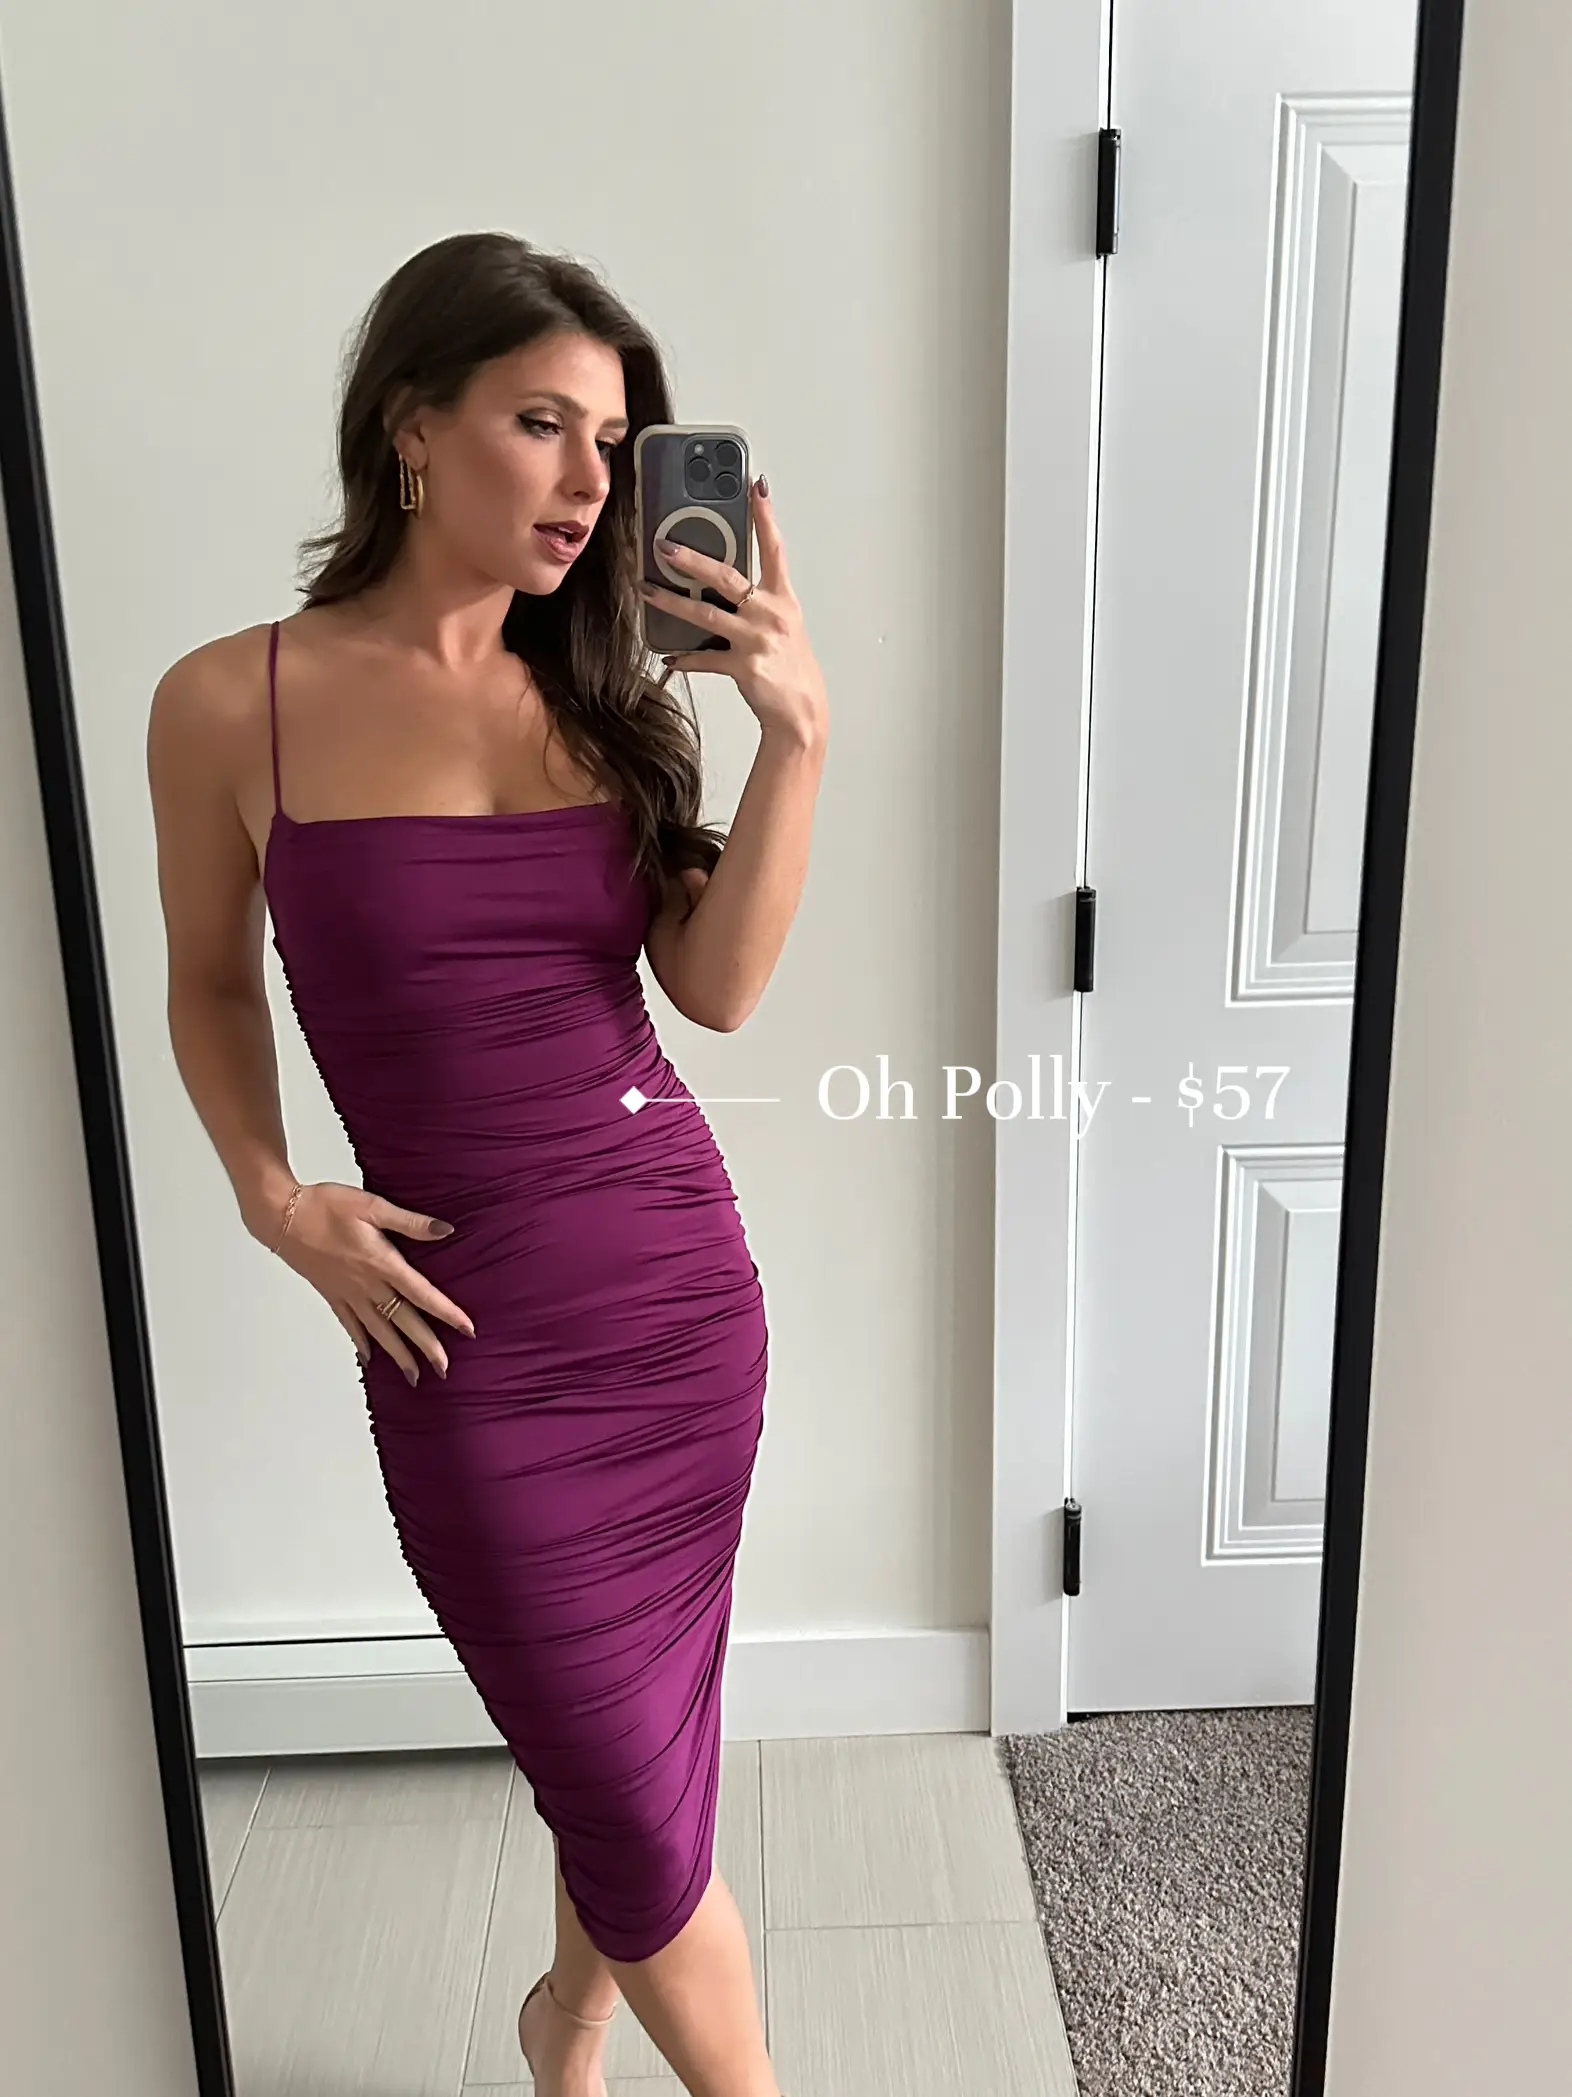 New in try on @COS wedding guest dresses